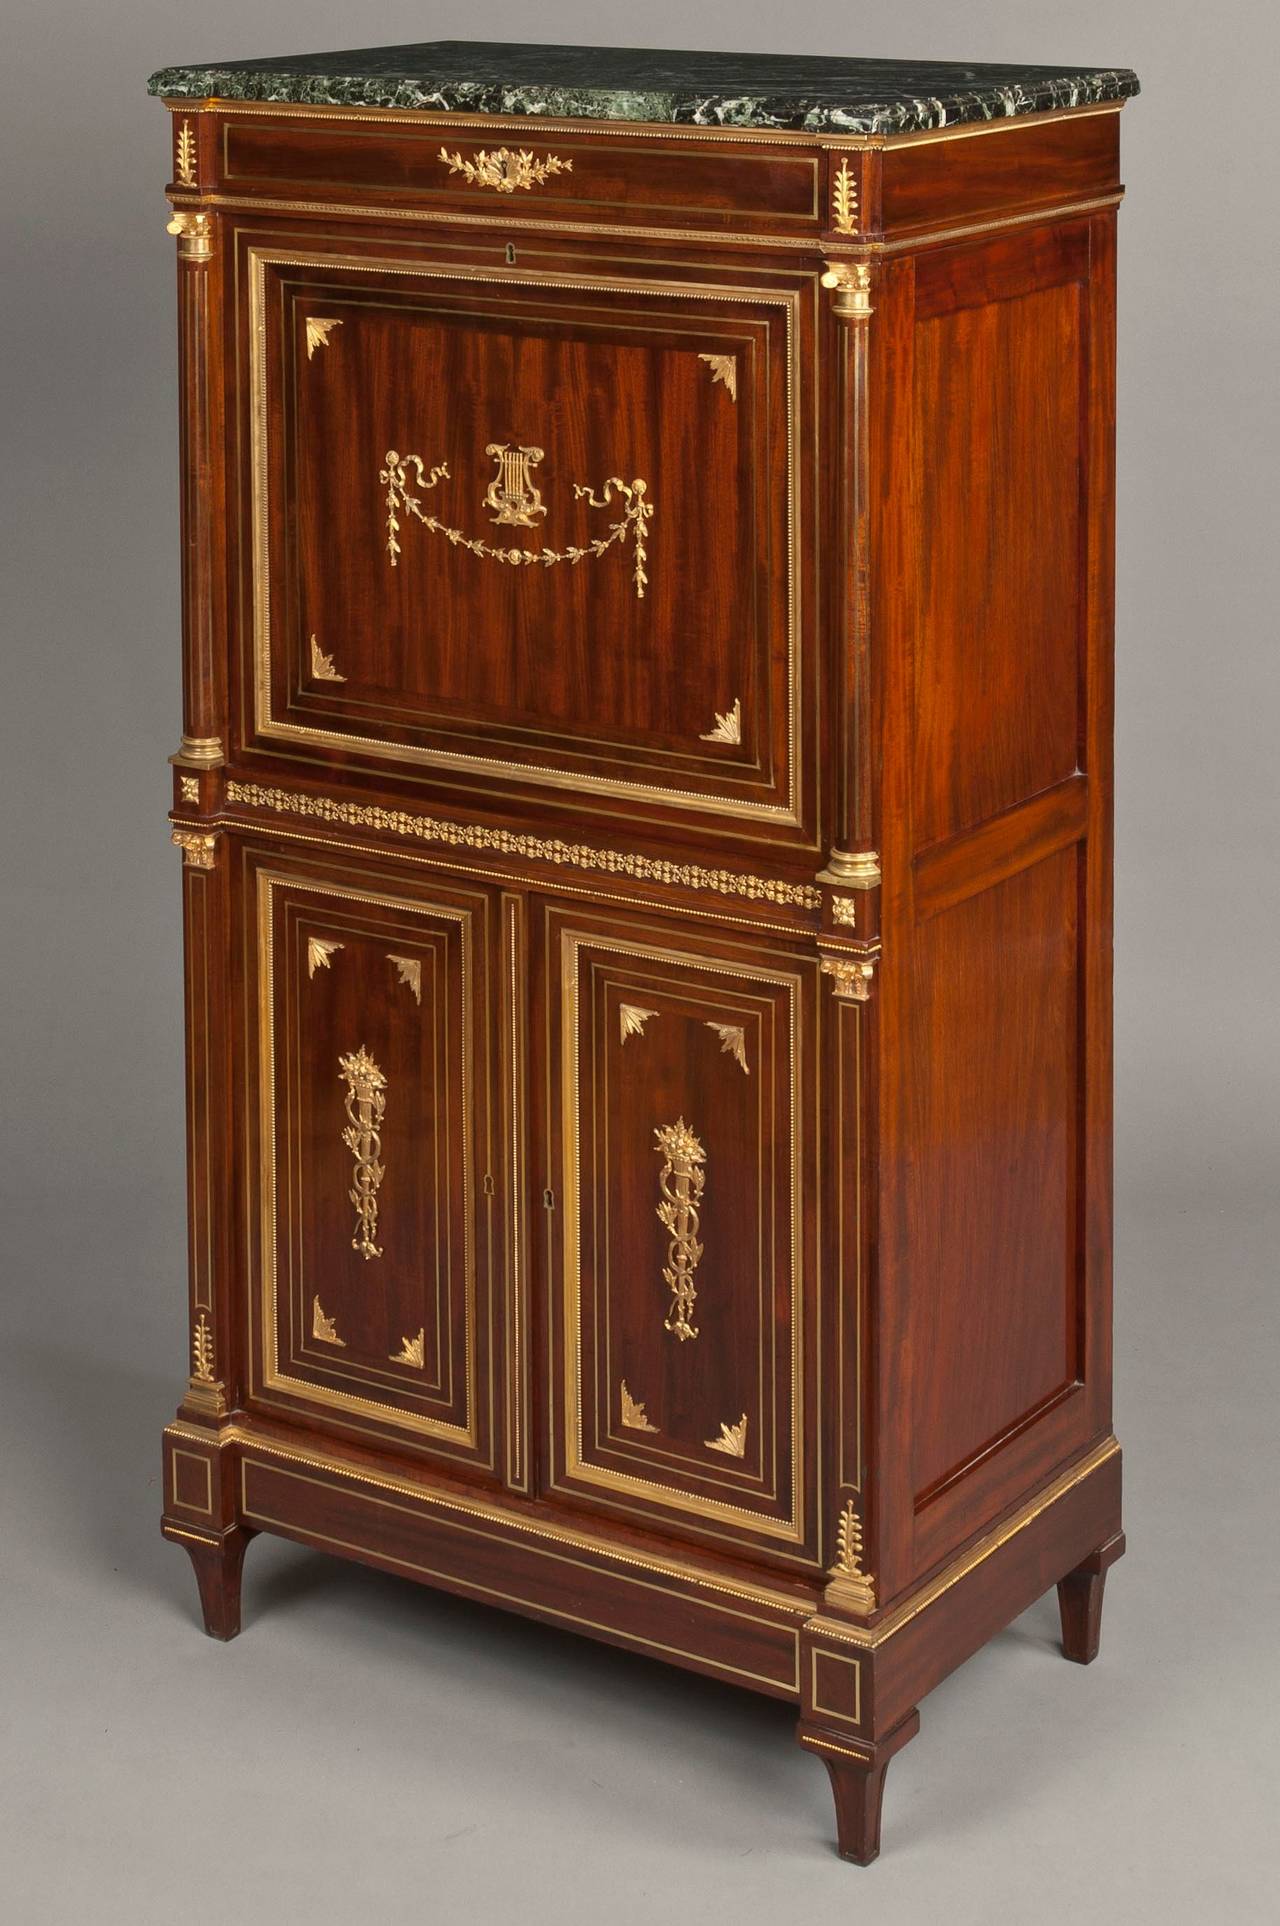 The case constructed in mahogany, with gilt bronze accents; rising from inverted truncated pyramidical legs; the platform of Verte de Mer marble with a thumbnail moulded edge, a long drawer below, with the fielded panelled fall front having running